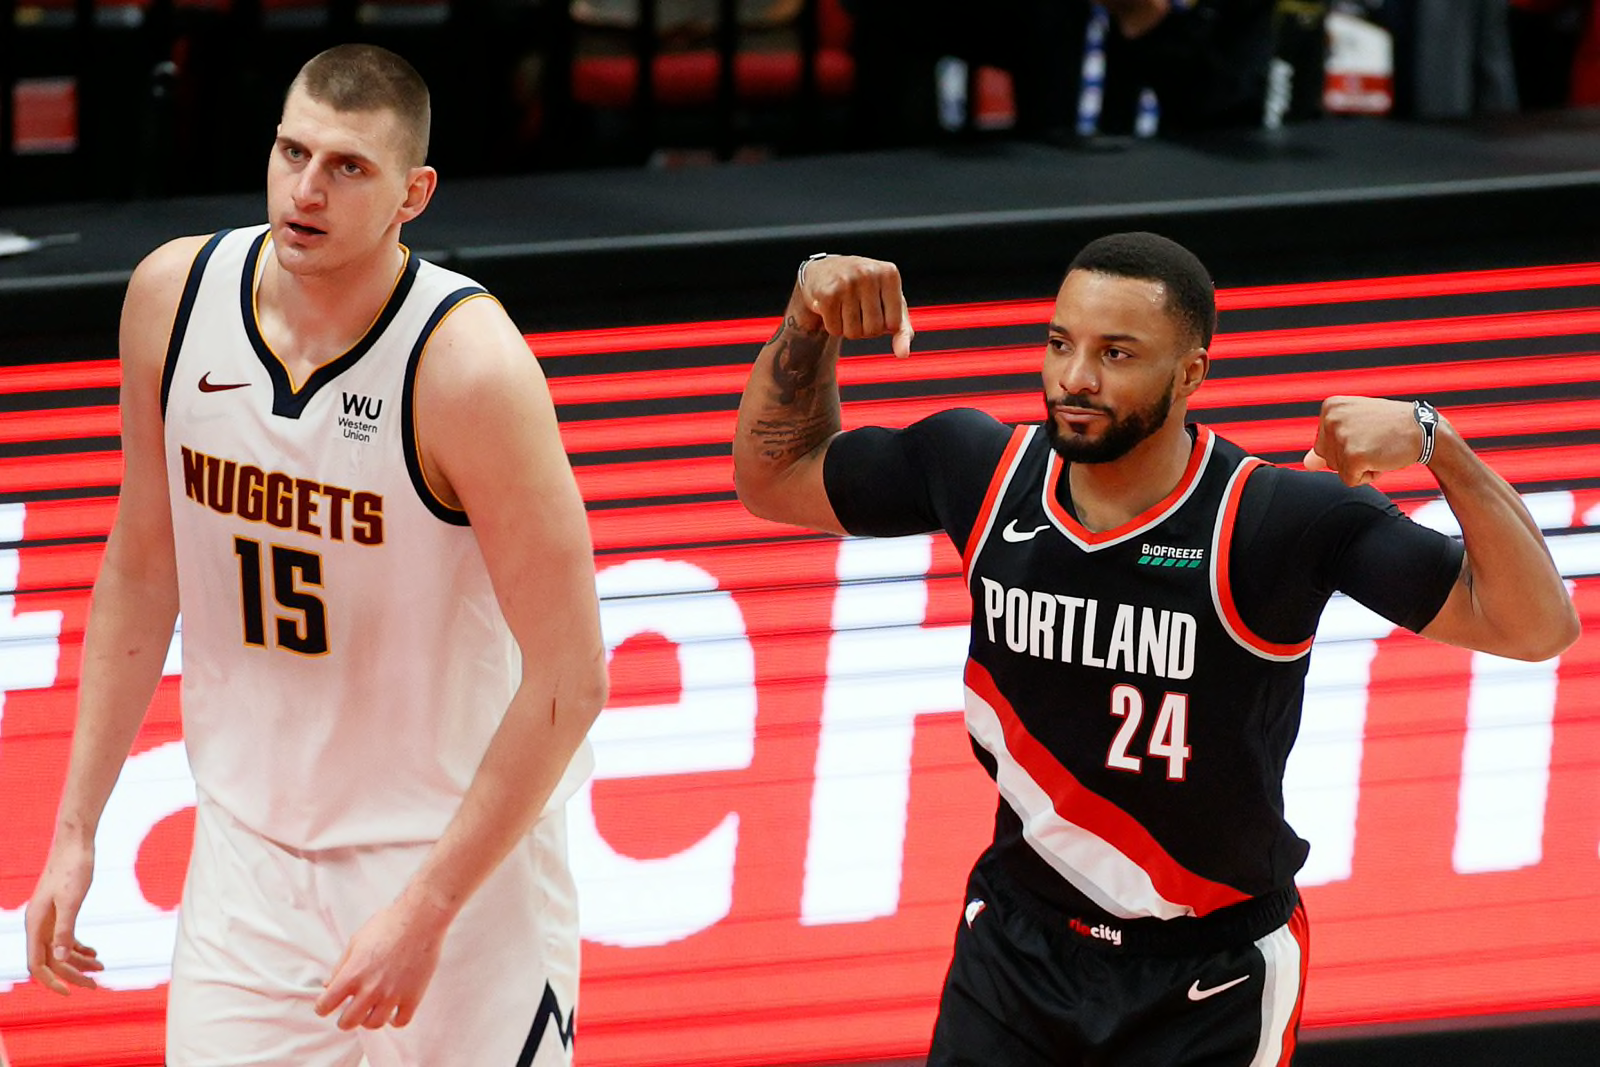 Norman Powell of the Portland Trail Blazers flexes after his basket against Nikola Jokic of the Denver Nuggets (Photo by Steph Chambers/Getty Images)